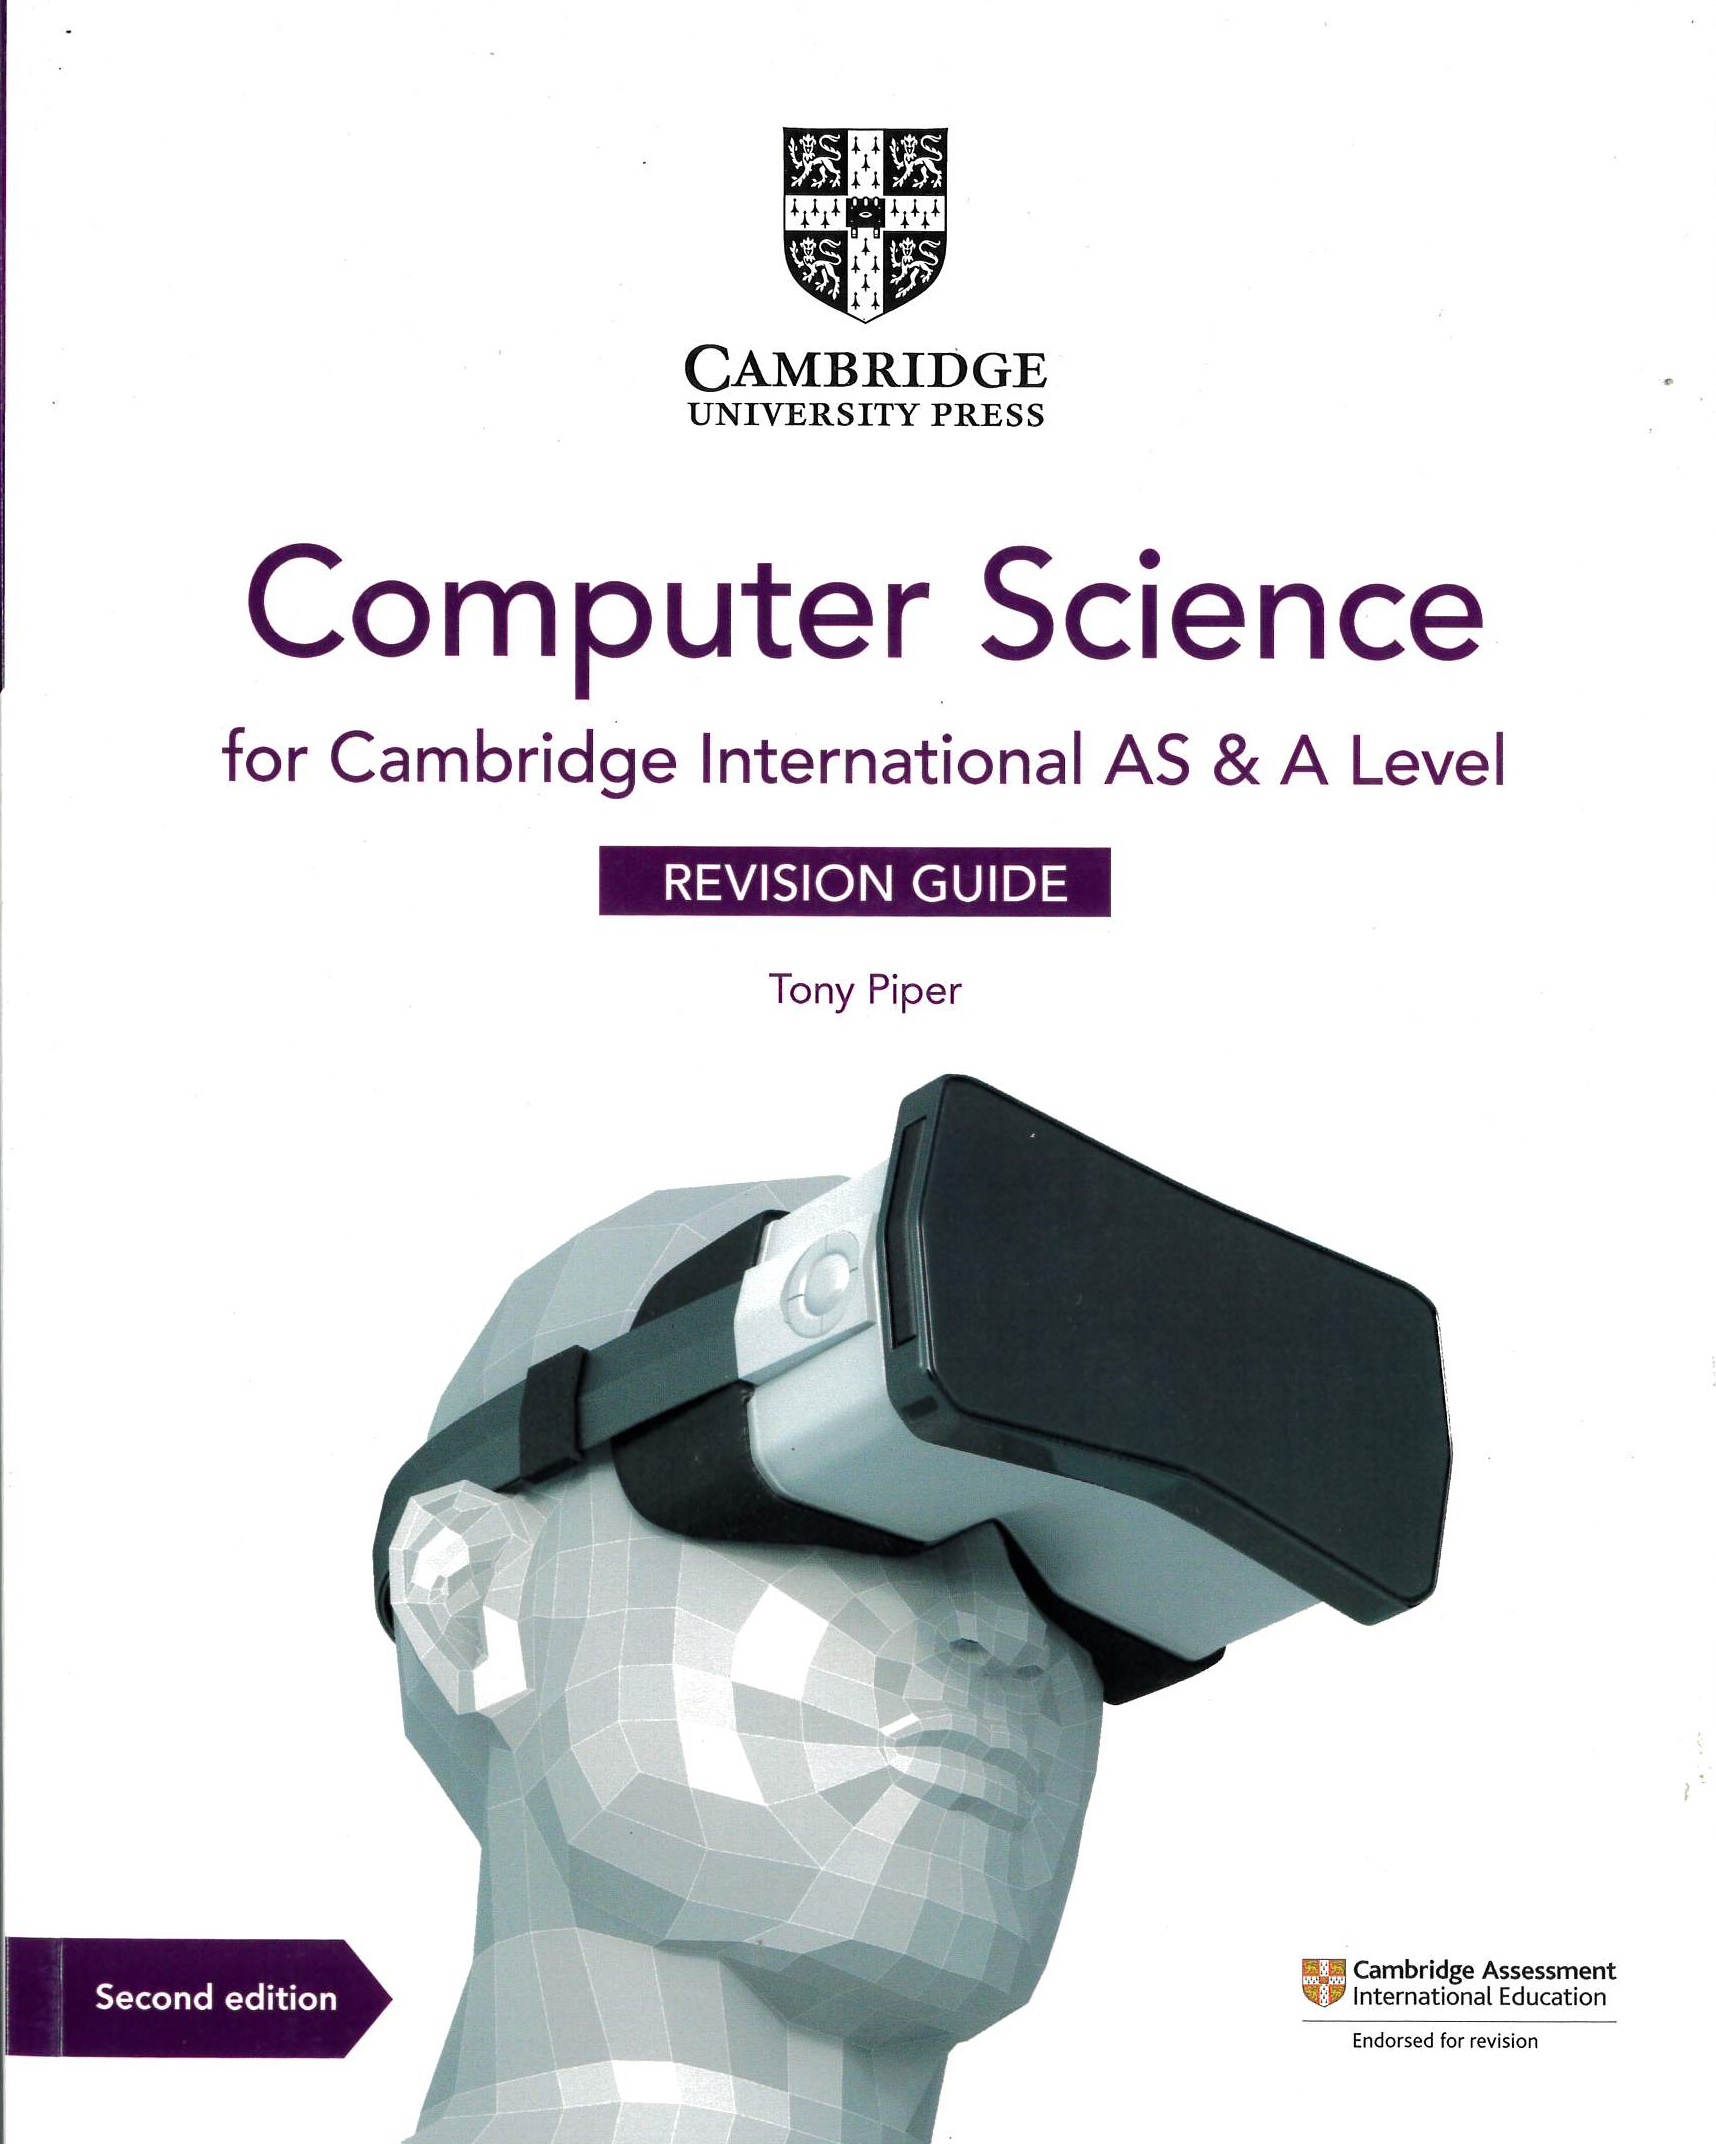 Computer science for Cambridge international AS and A level. Revision guide